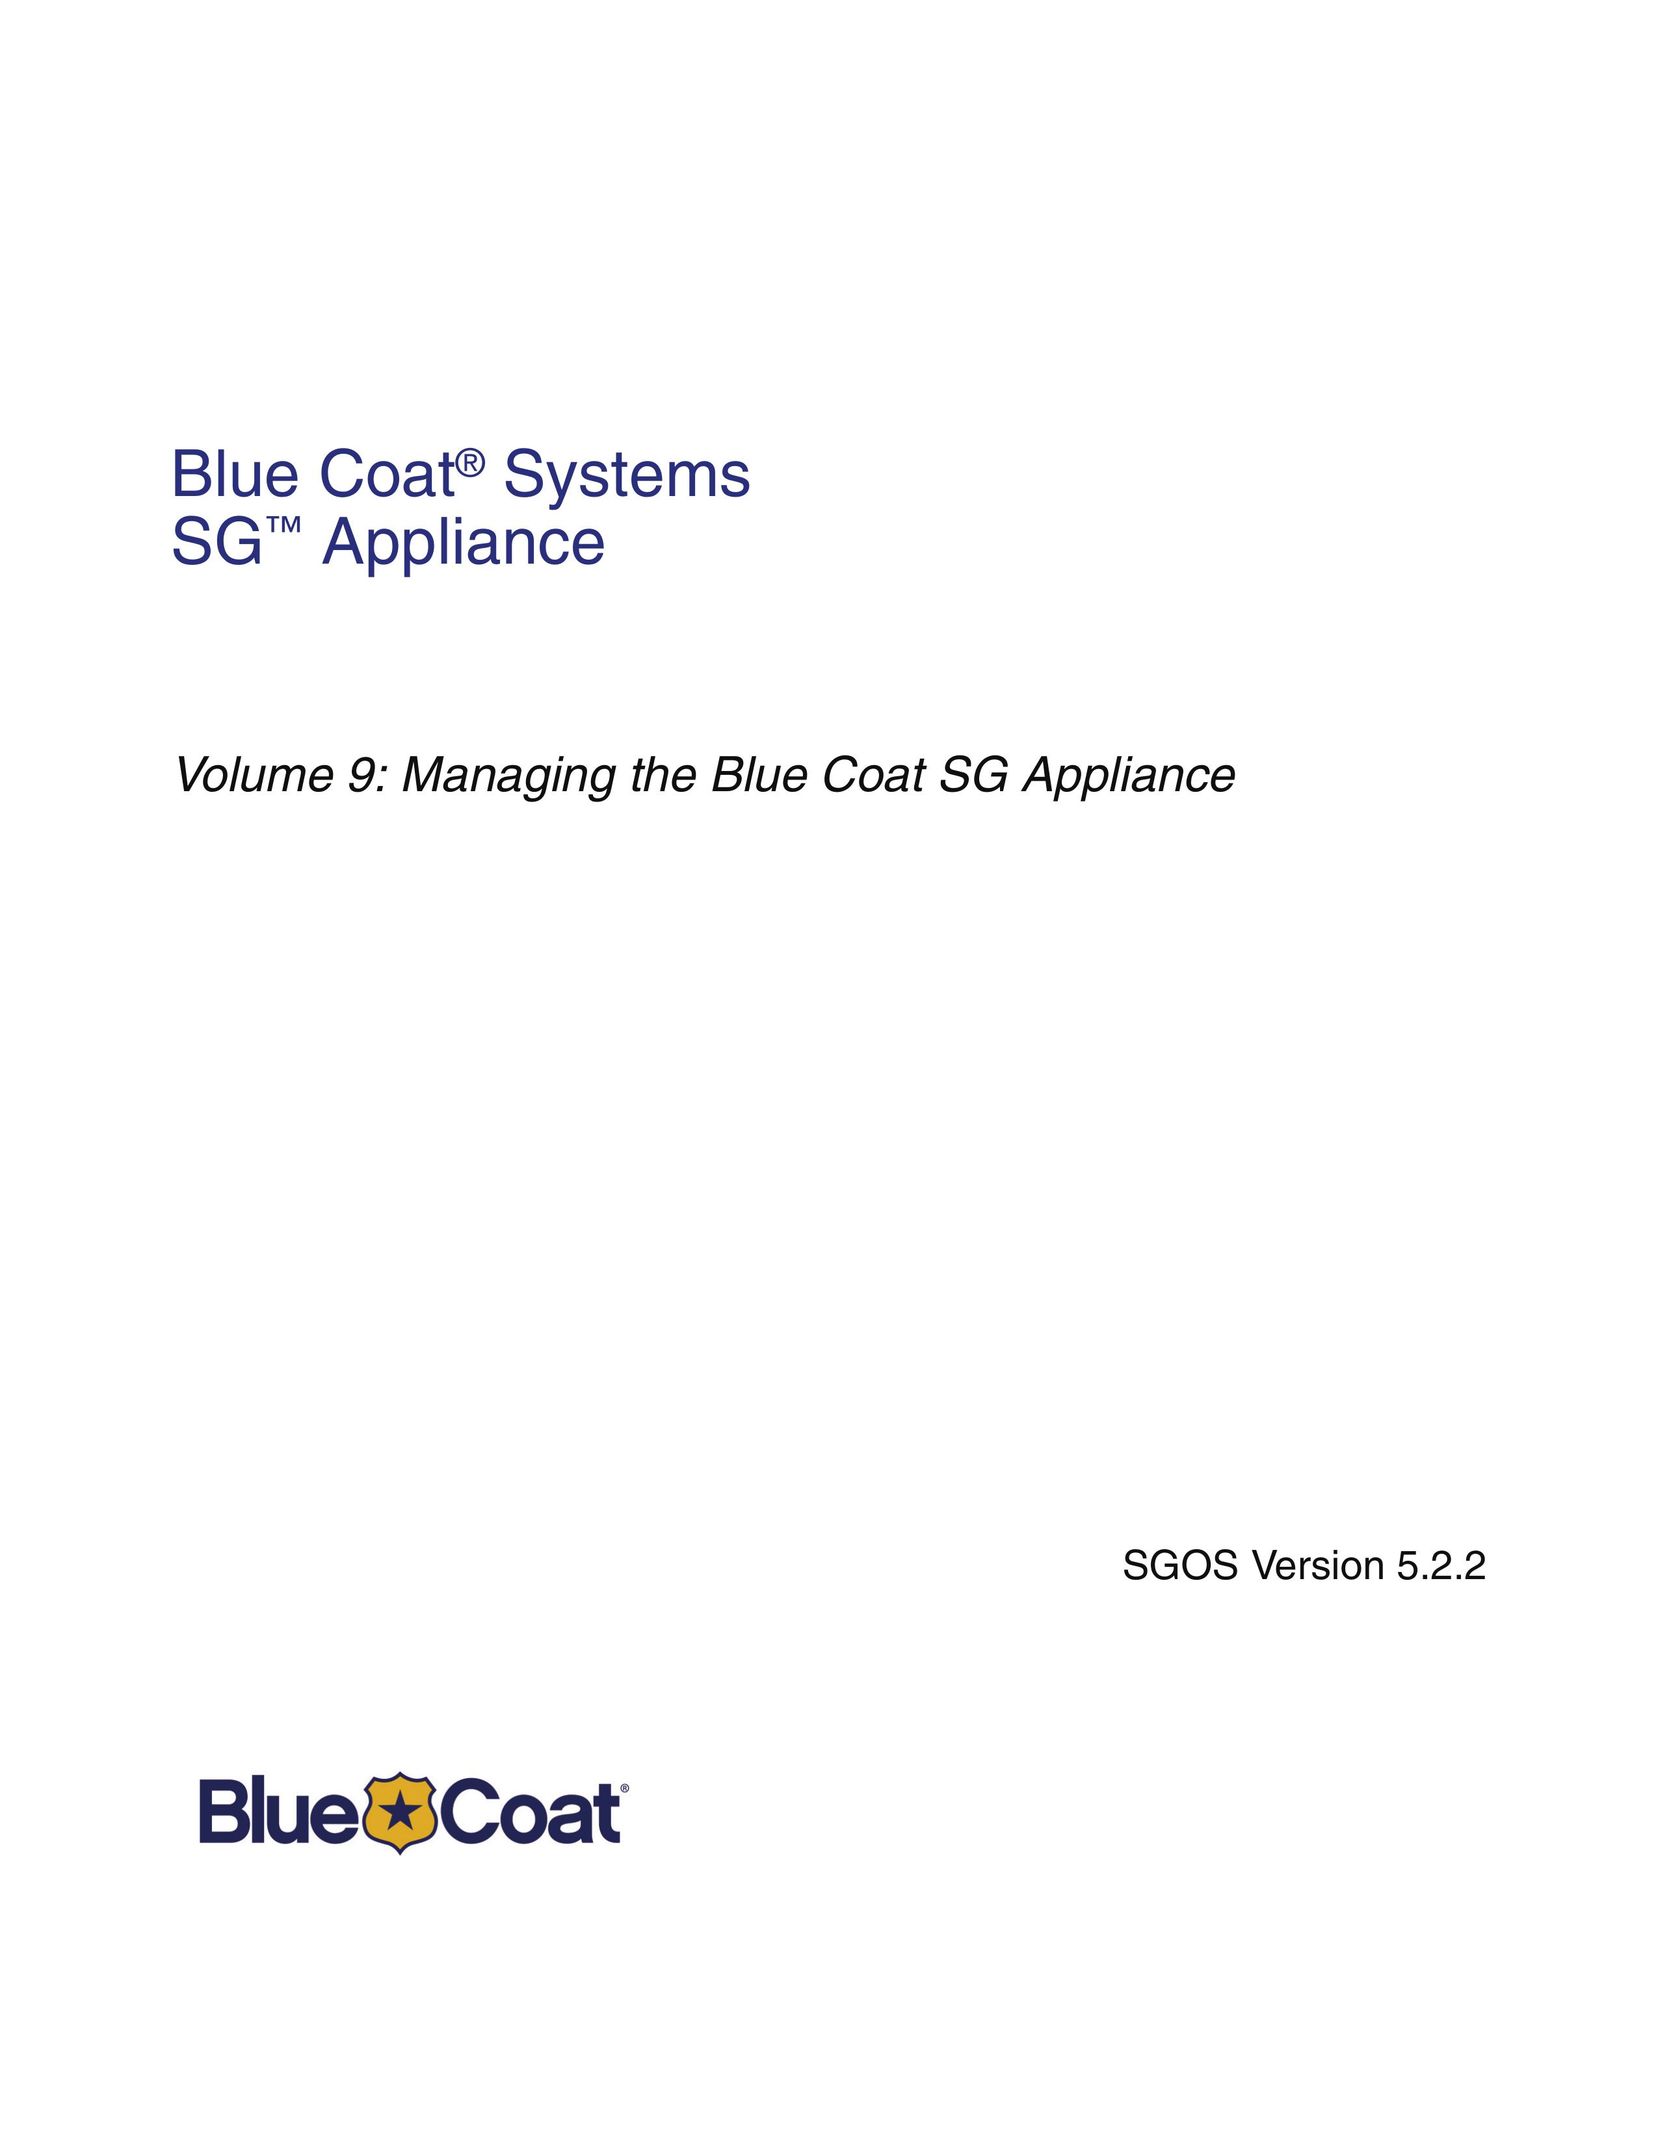 Blue Coat Systems Blue Coat Systems SG Appliance Appliance Trim Kit User Manual